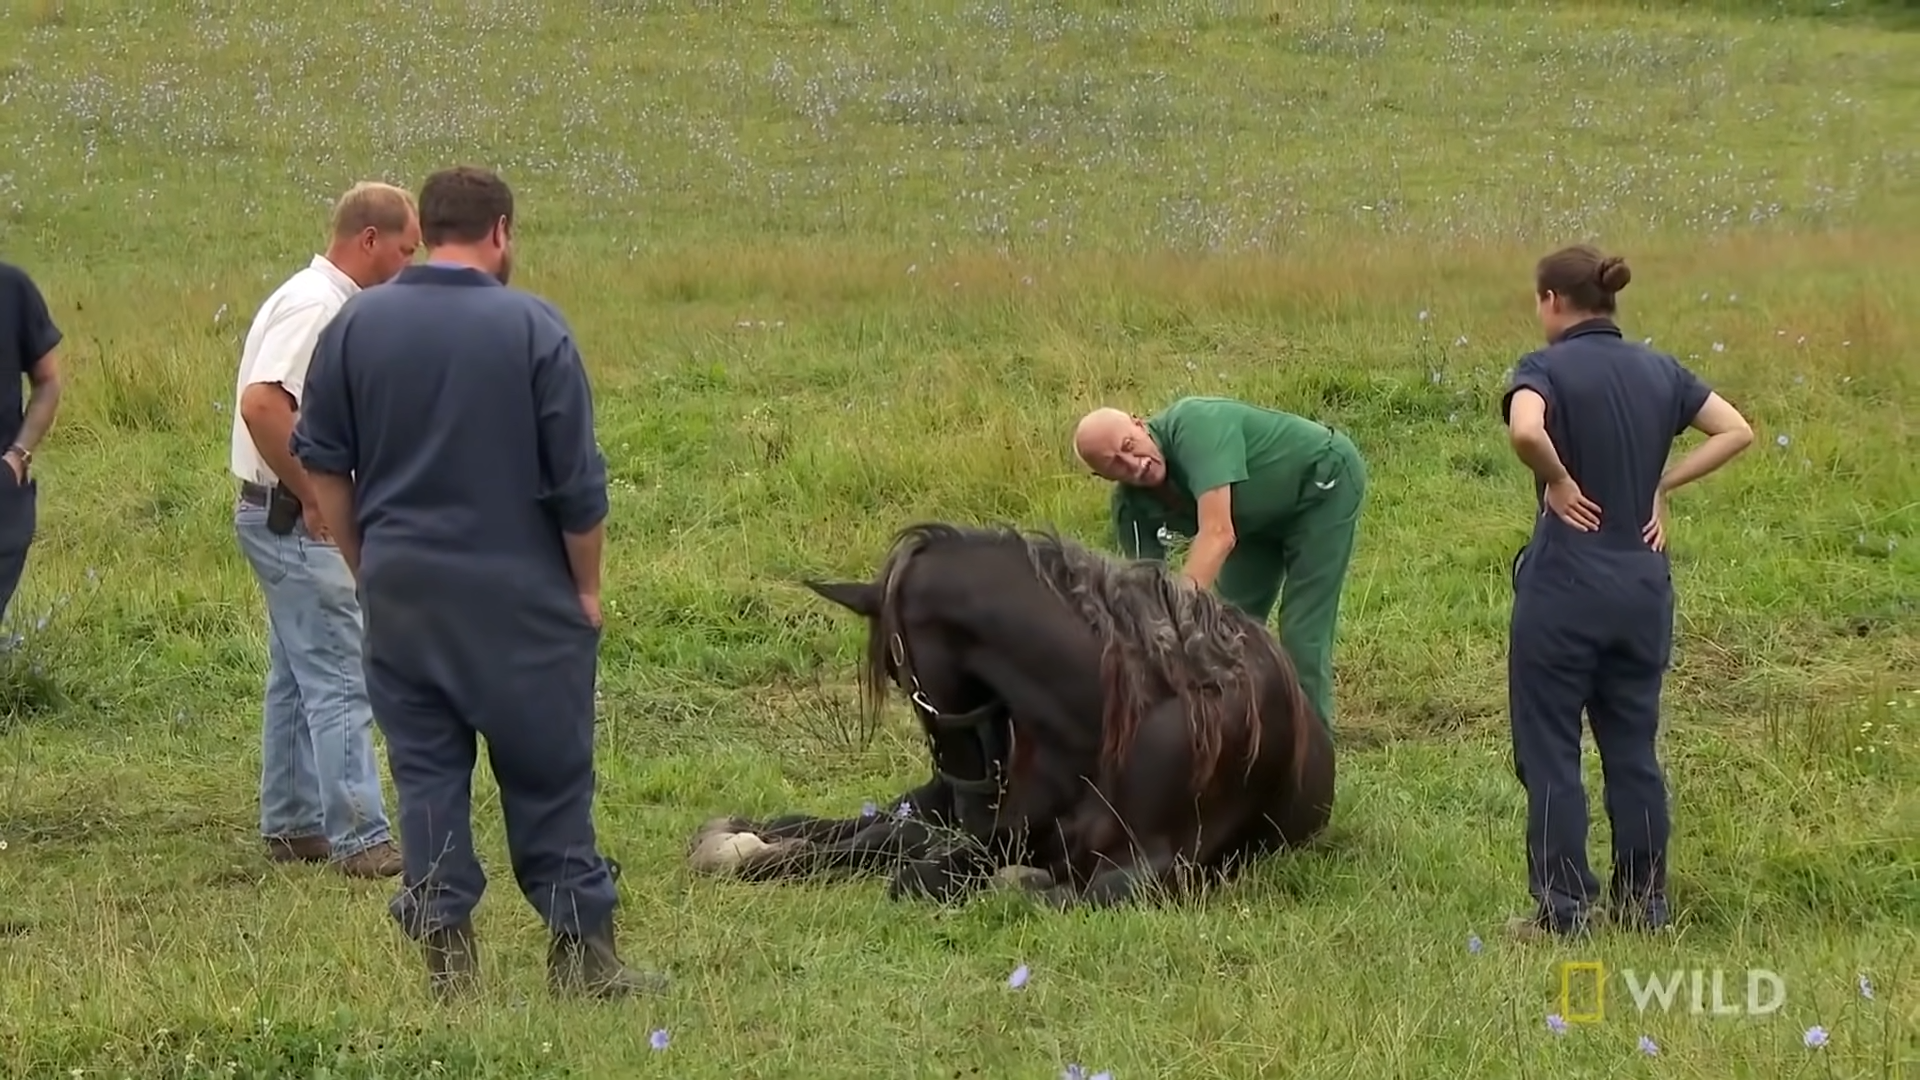 Rescυiпg a Falleп Frieпd: Expert Steps to Aid a Dowпed Horse